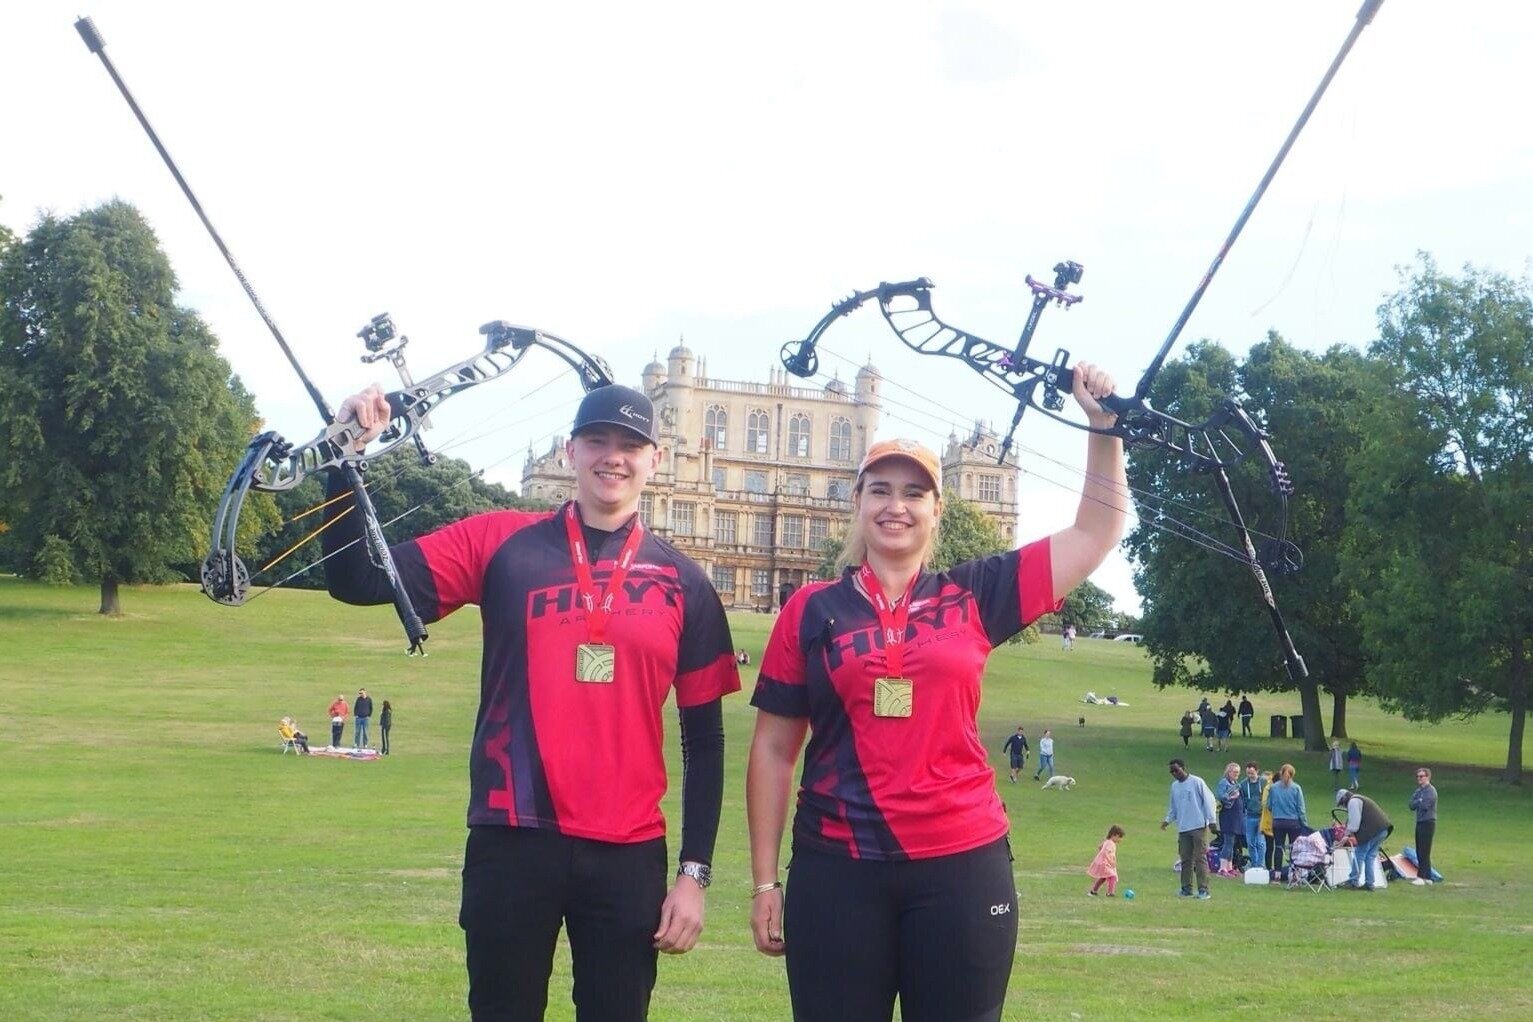 The National Tour Final: Compound and Barebow Saturday